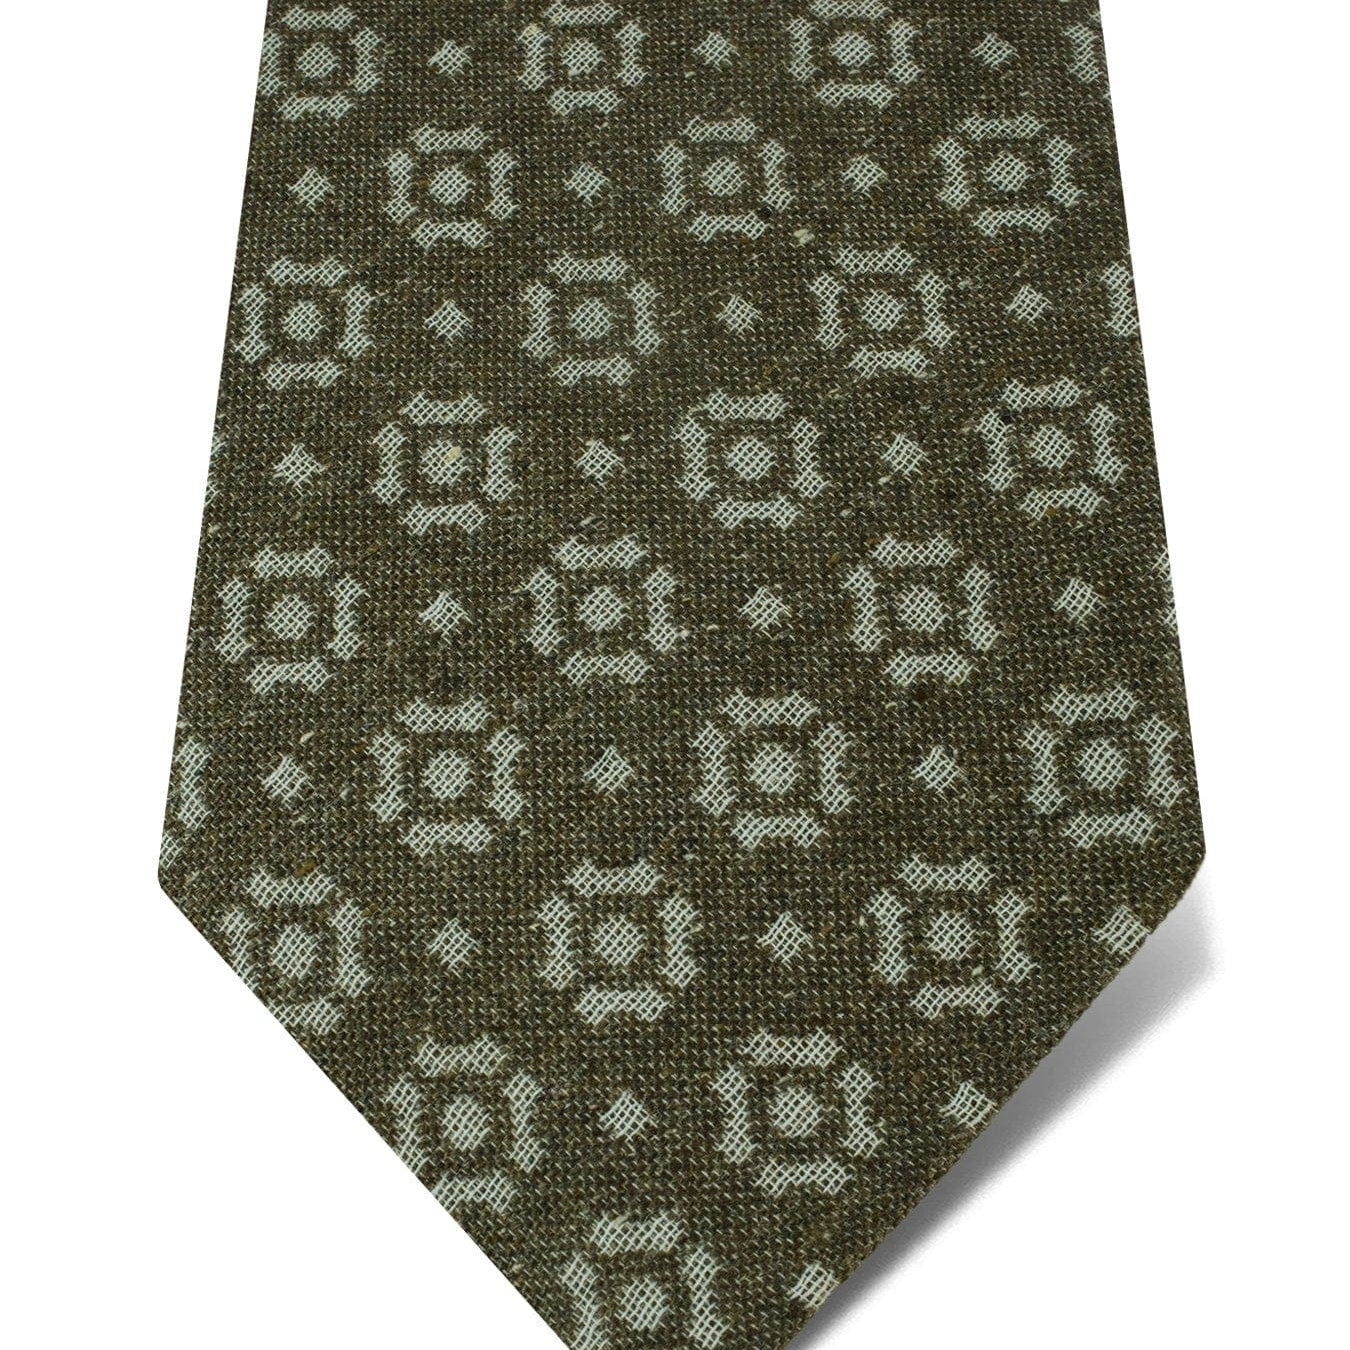 Brown & White Woven Cotton & Silk Tie with White Abstract Pattern